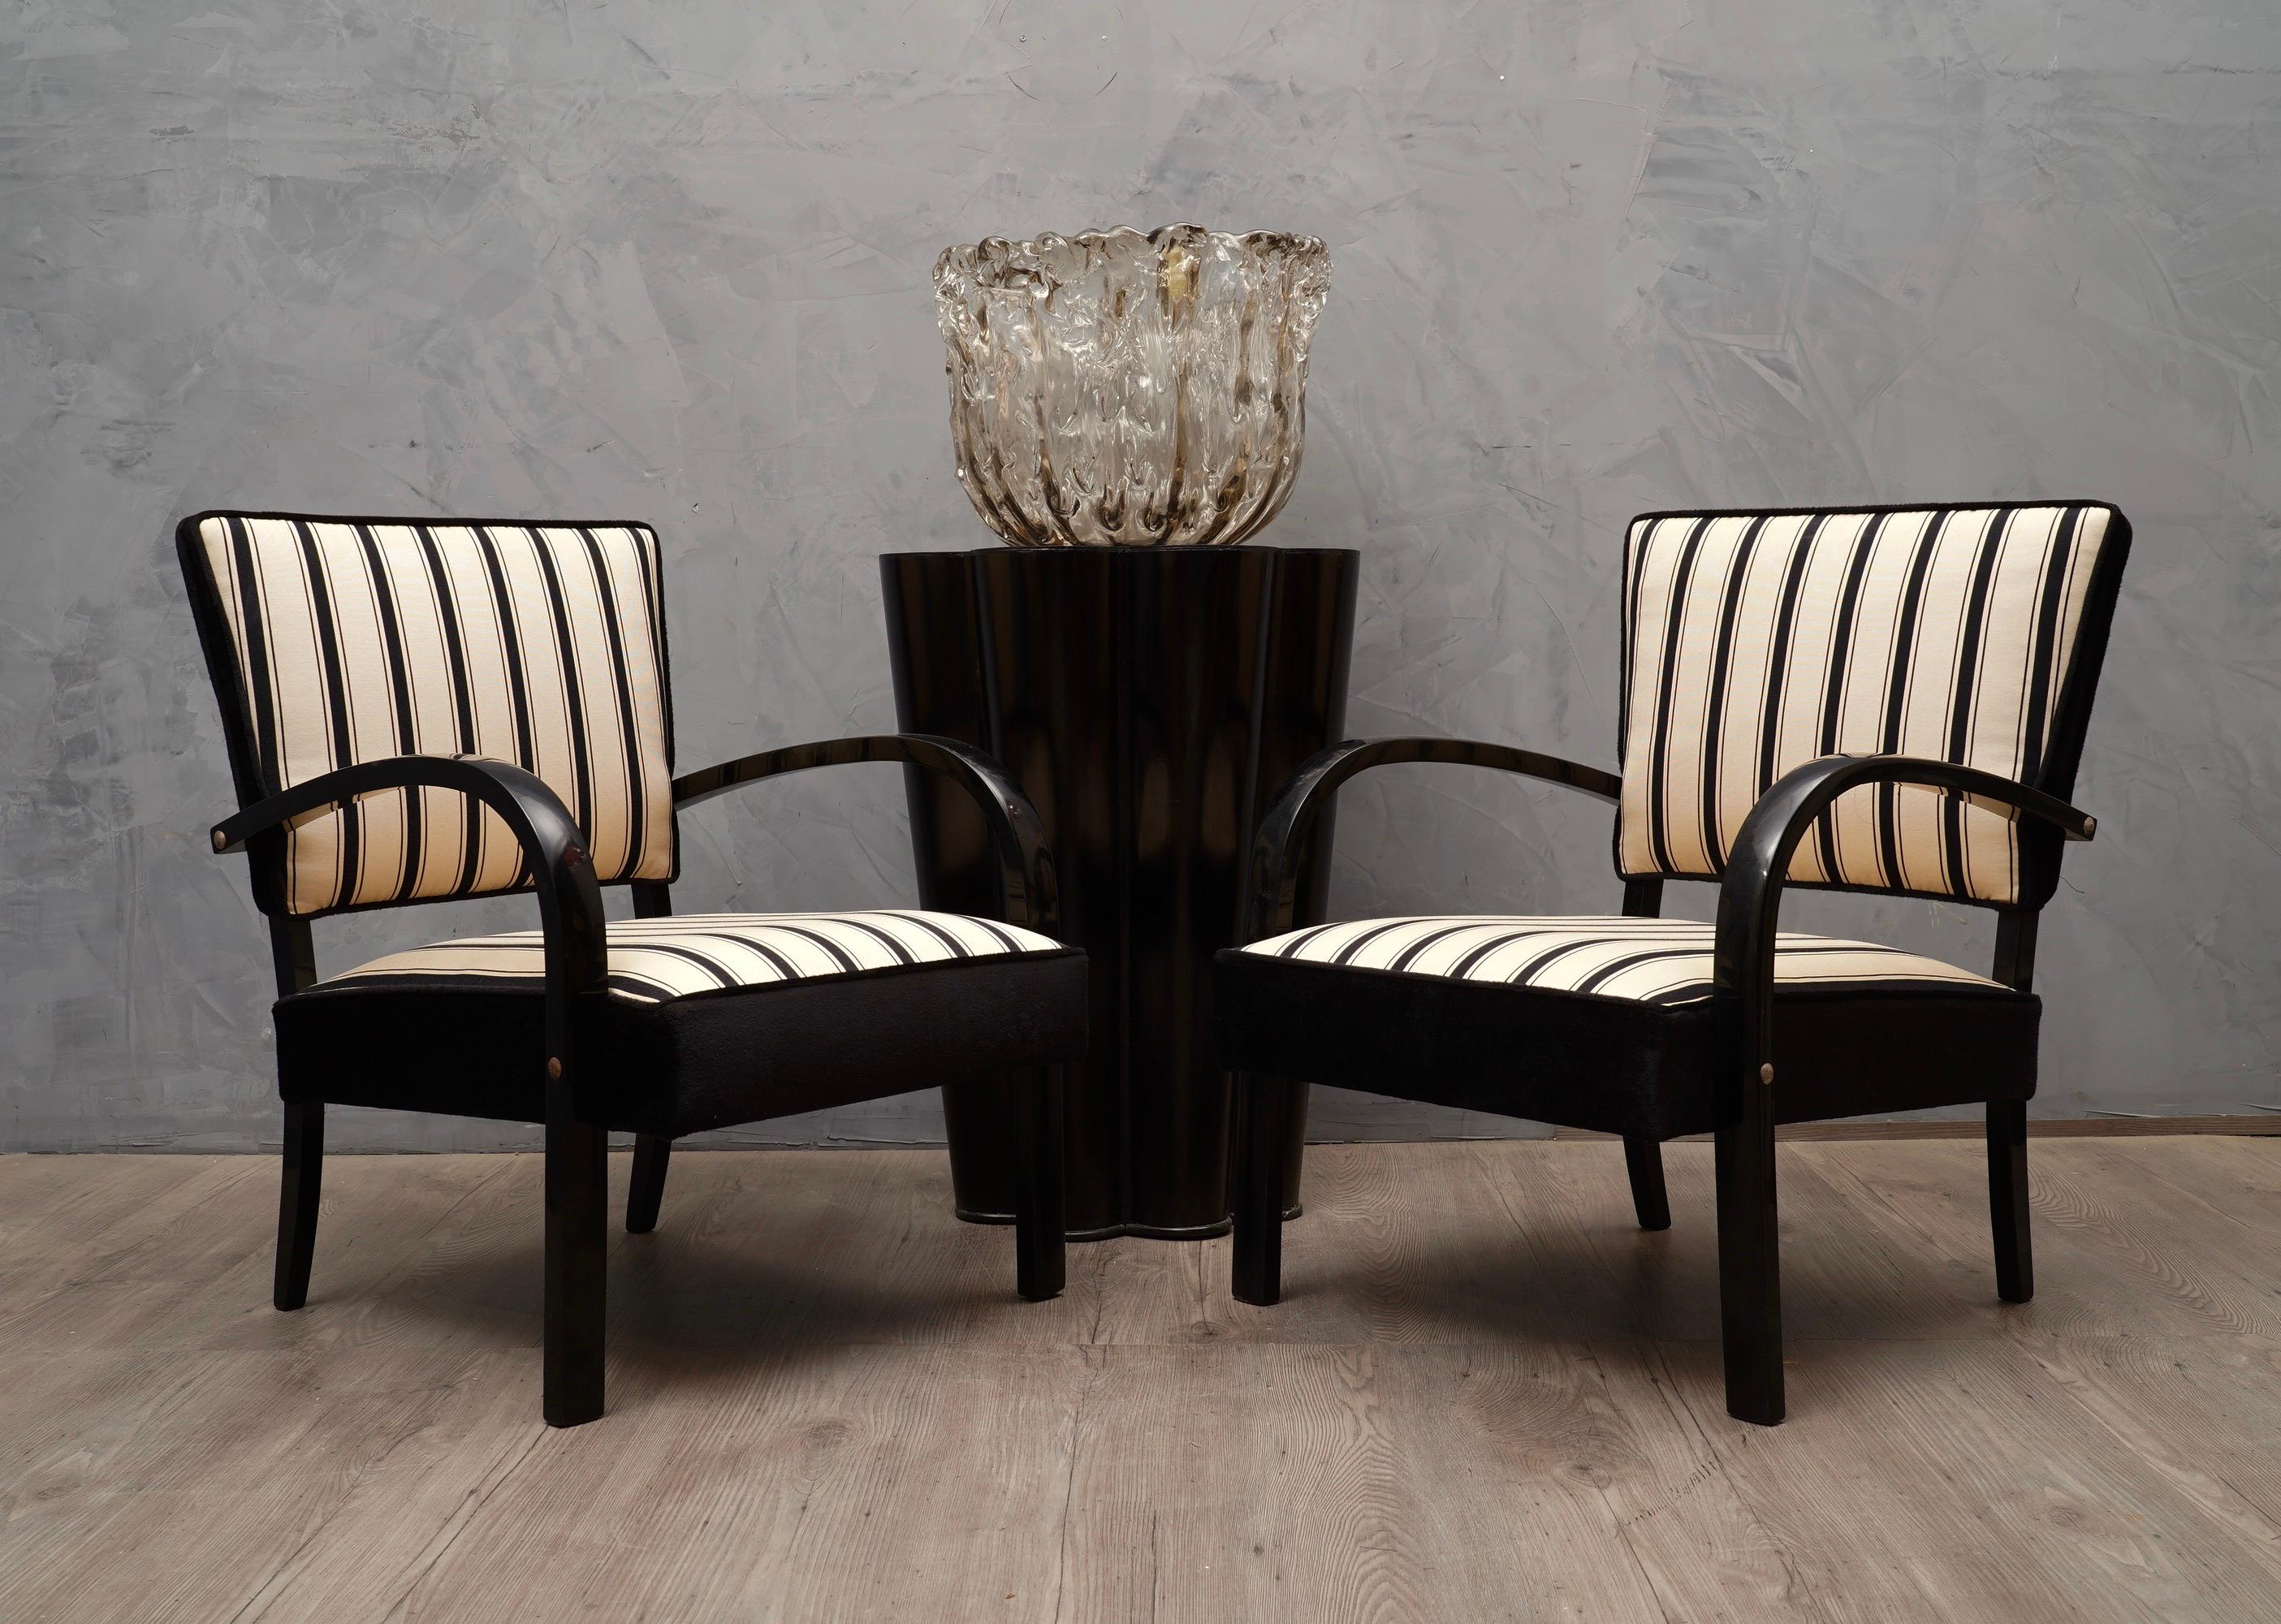 Very elegant appearance due the use of not common fabric, coming from particular Italian silk factory, this gentle upholstery gives these armchairs a very luxurious appearance.

All covered with two types of combined velvet and fabric. One black and